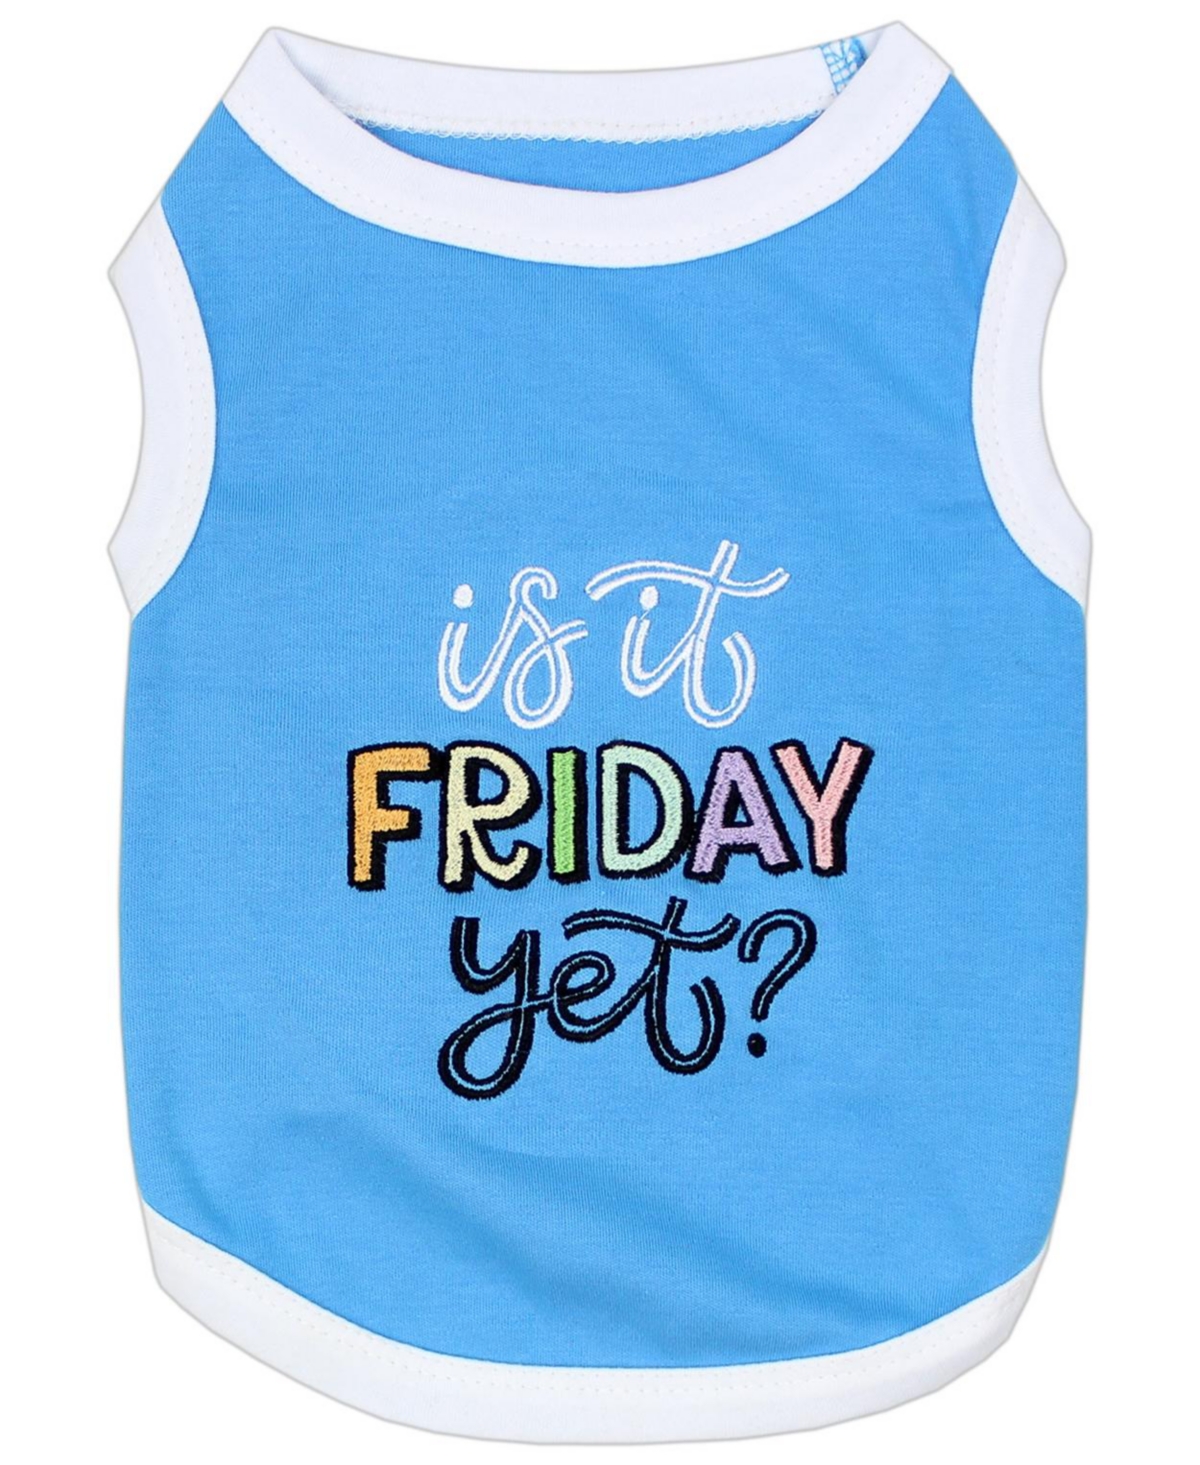 Is It Friday Yet Dog T-shirt - Blue